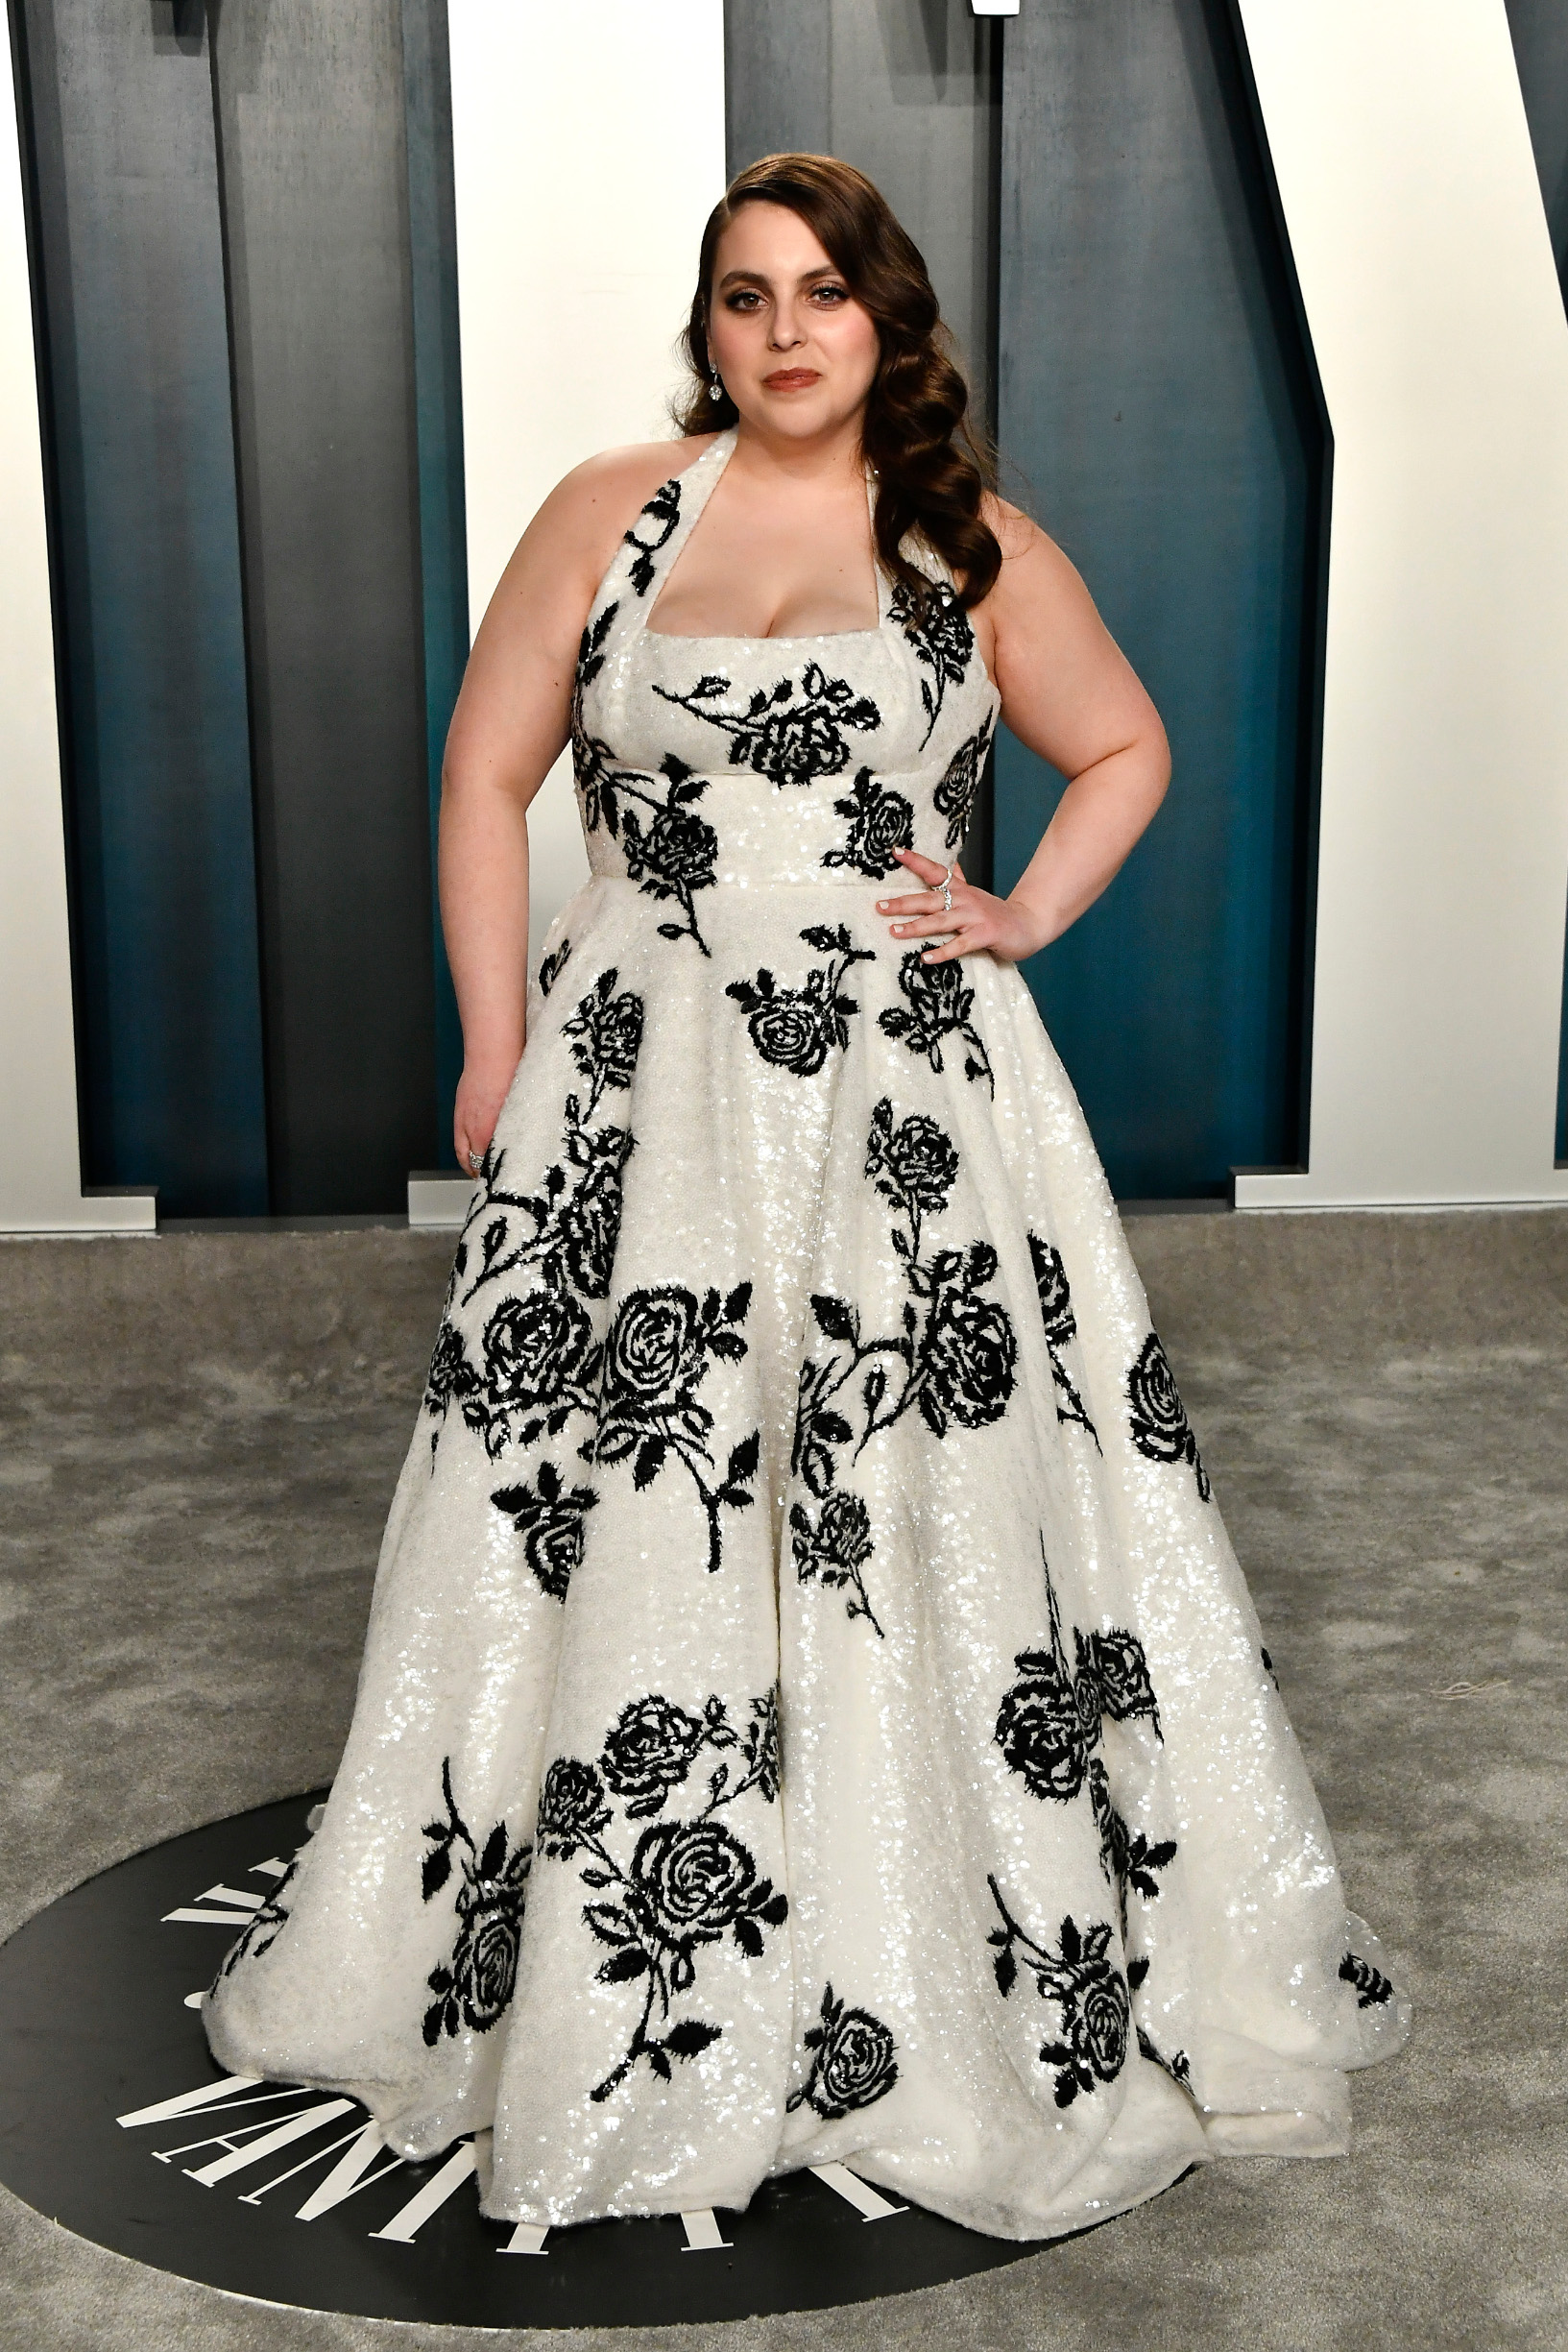 BEVERLY HILLS, CALIFORNIA - FEBRUARY 09: Beanie Feldstein  attends the 2020 Vanity Fair Oscar Party hosted by Radhika Jones at Wallis Annenberg Center for the Performing Arts on February 09, 2020 in Beverly Hills, California. (Photo by Frazer Harrison/Getty Images)